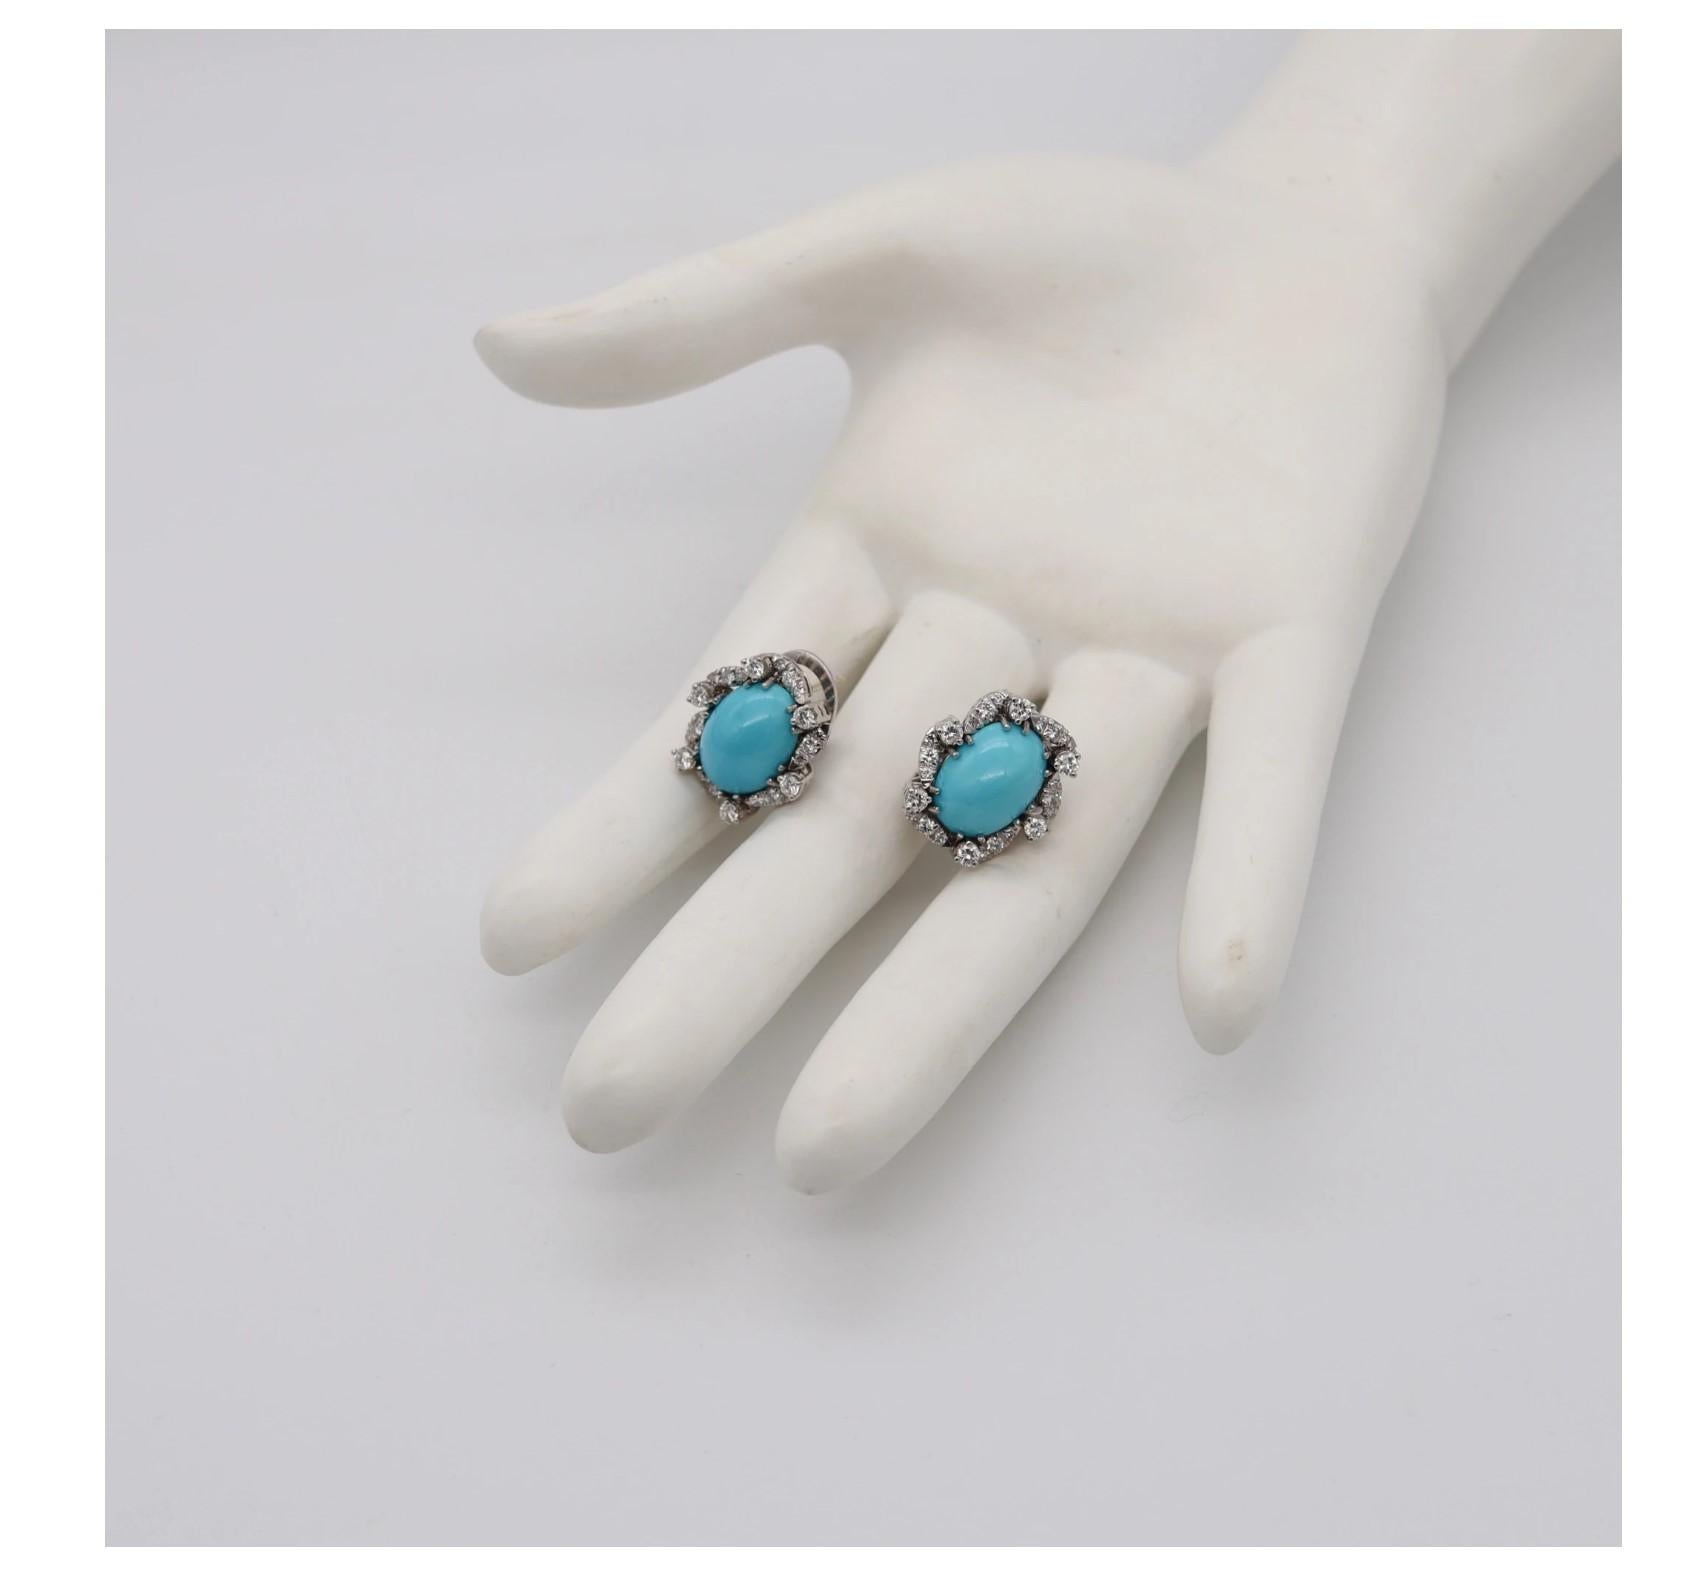 Women's Austria 1950 Late Deco Earrings Platinum with 19.12 Cts in Diamonds & Turquoises